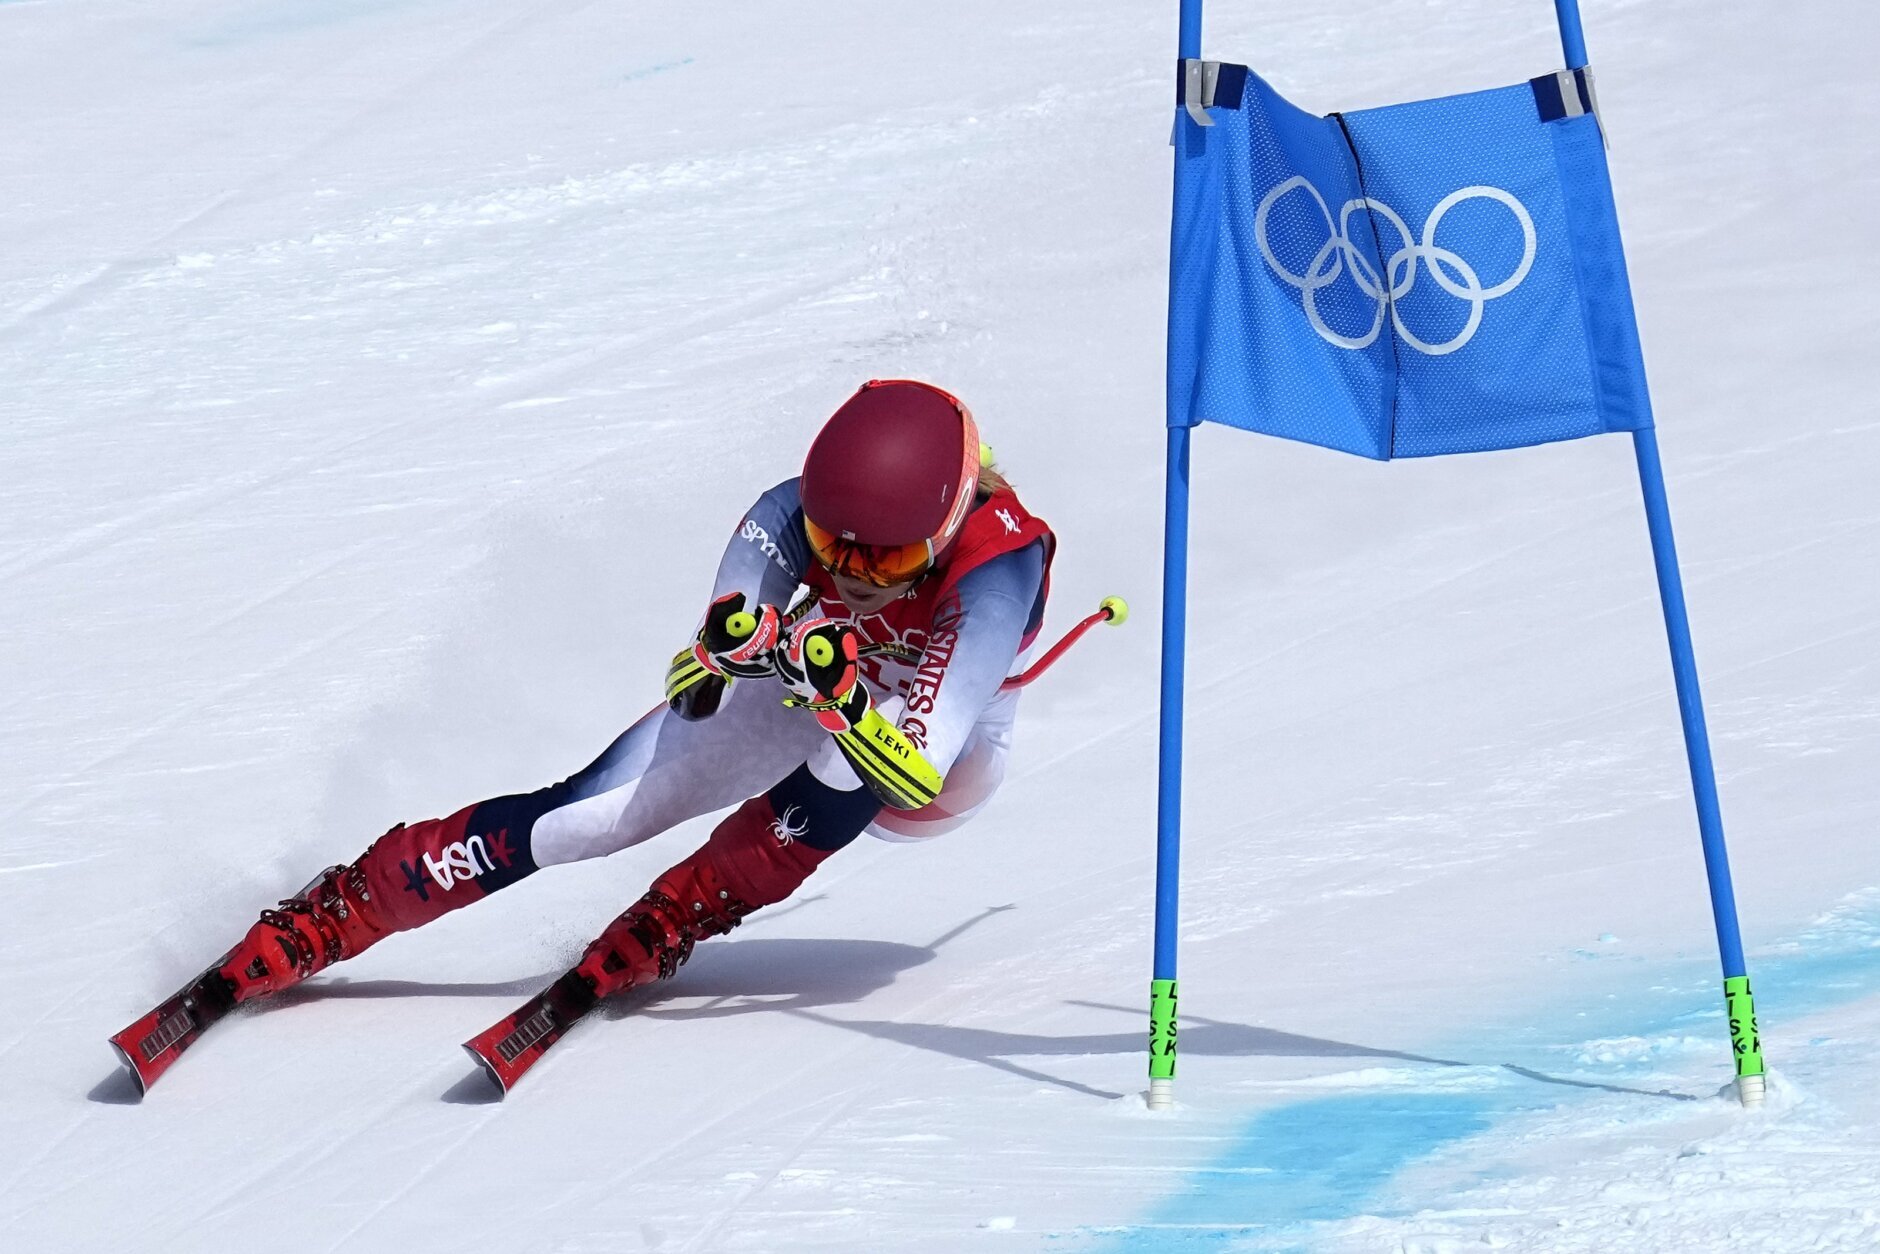 Mikaela Shiffrin, of United States makes a turn during the women's super-G at the 2022 Winter Olympics, Friday, Feb. 11, 2022, in the Yanqing district of Beijing. (AP Photo/Robert F. Bukaty)